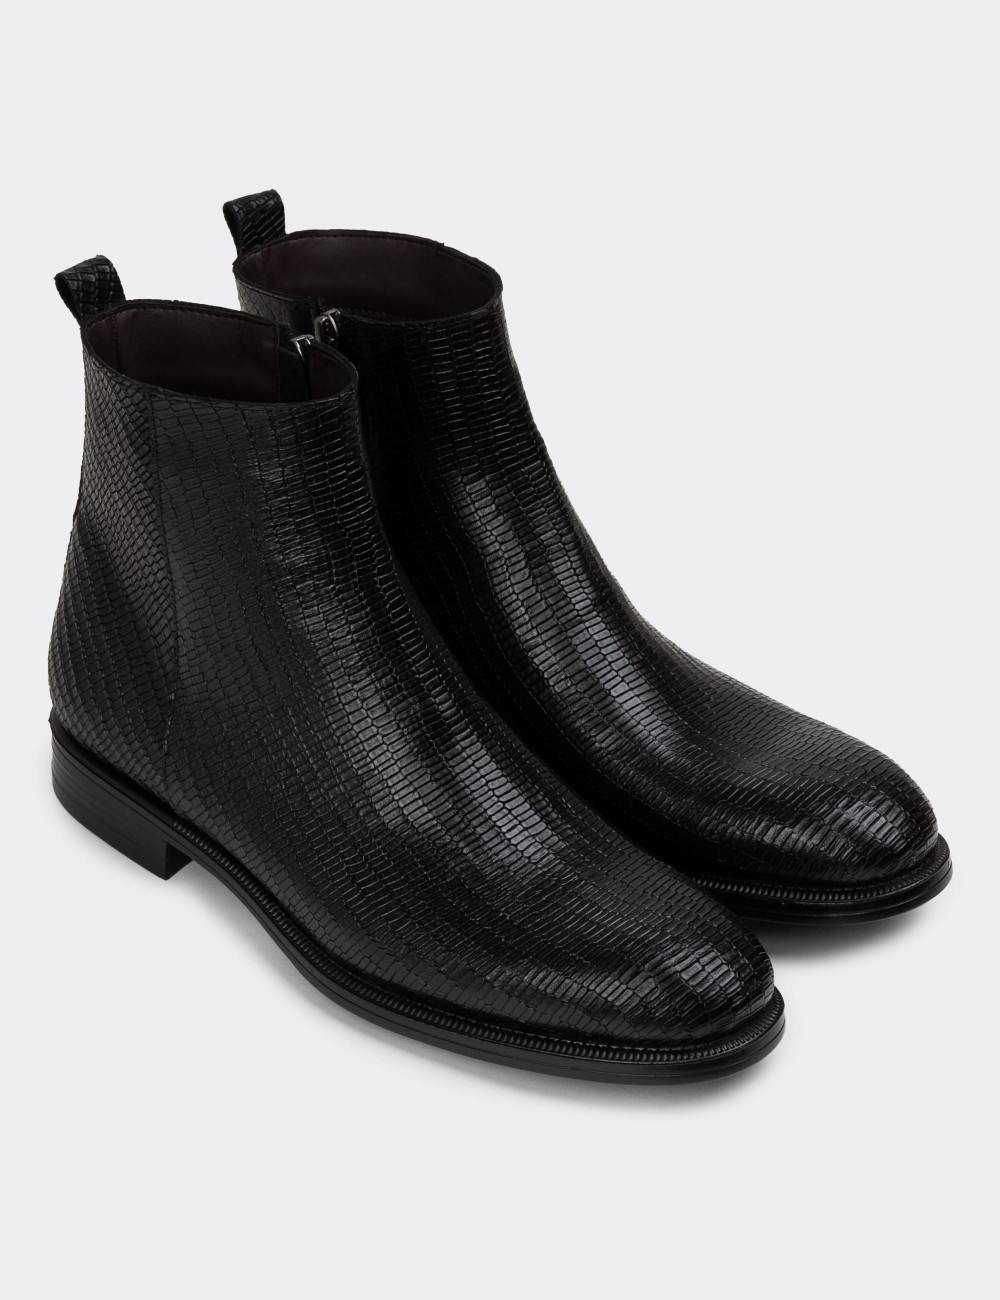 Black Leather Boots - 01921MSYHC09